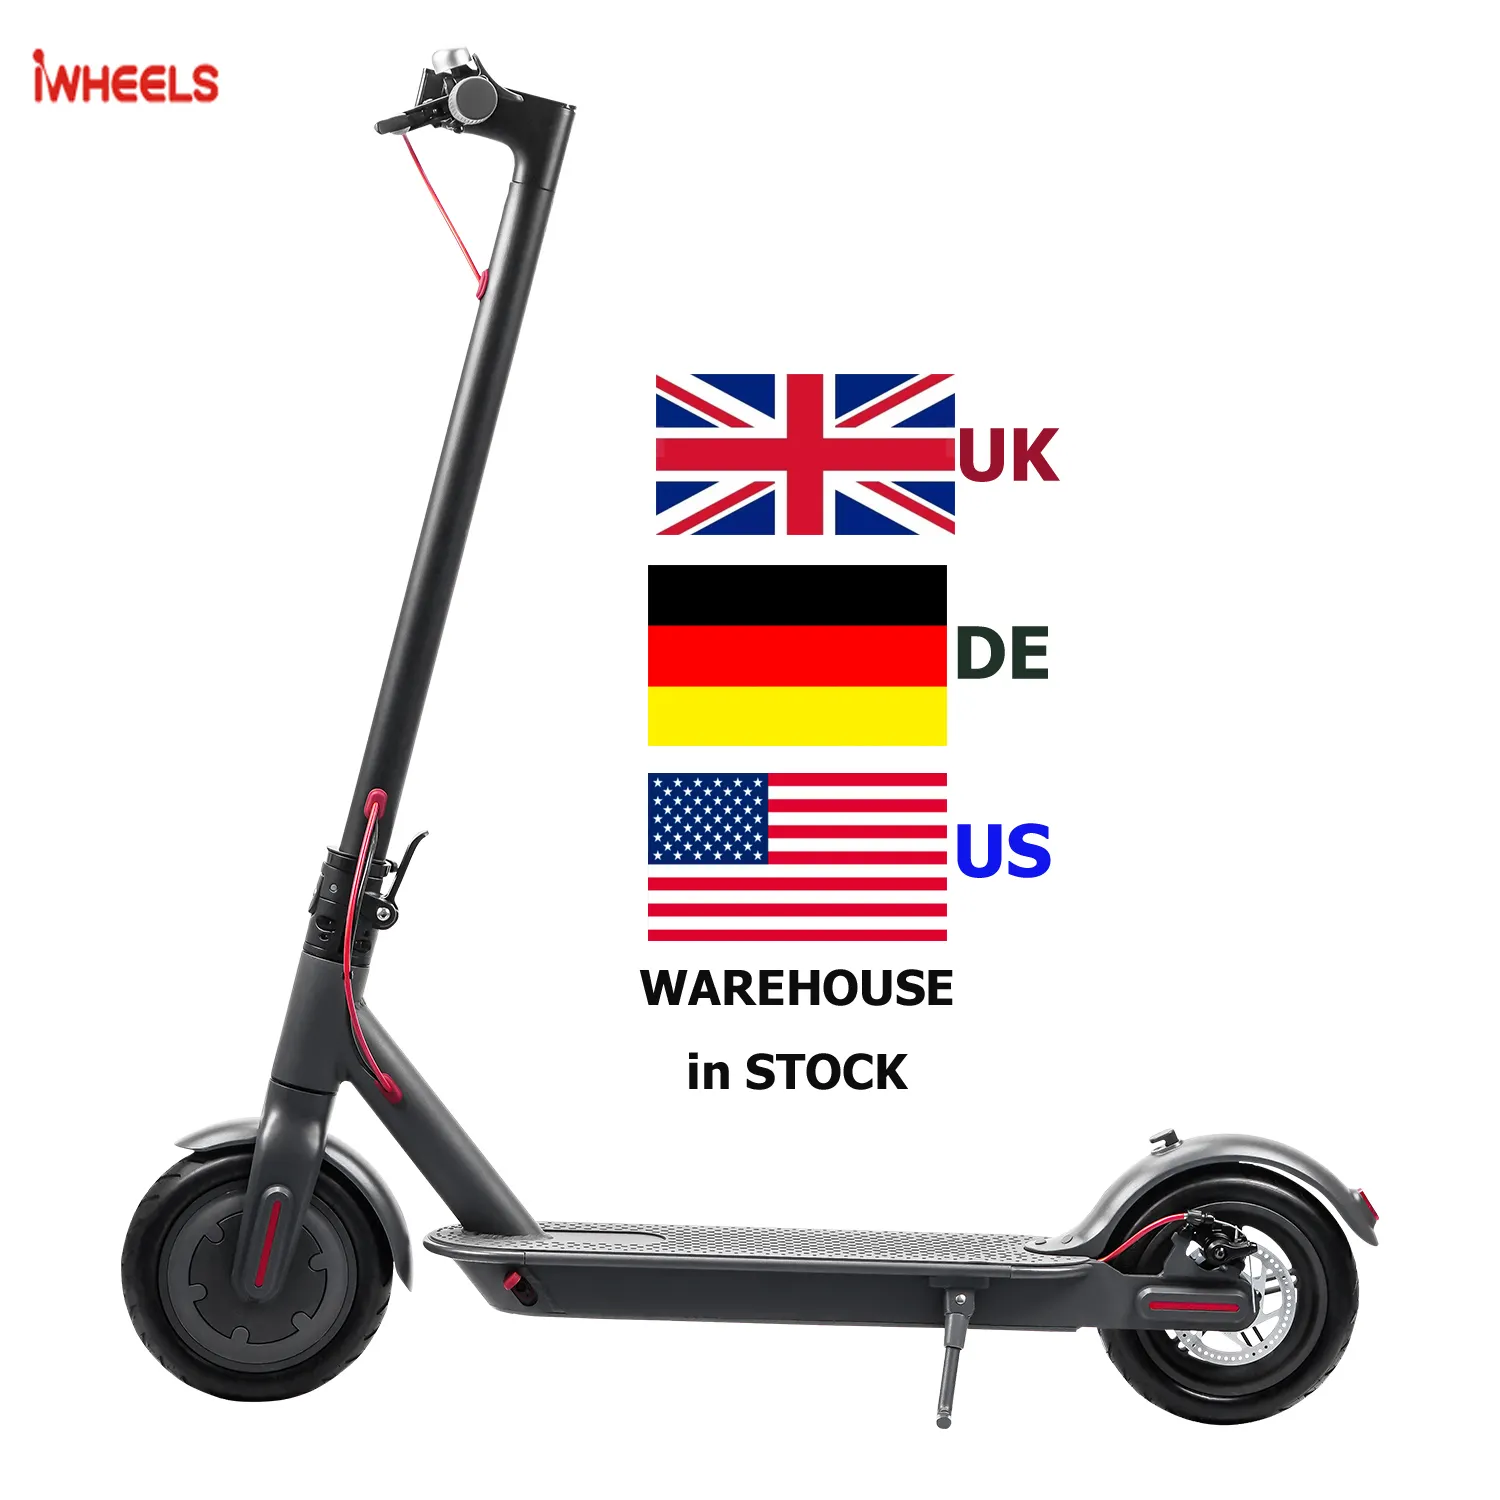 Drop shipping service Tax Free EU UK US warehouse direct e scooters super 33km mileage 350w motor electric scooter for adults